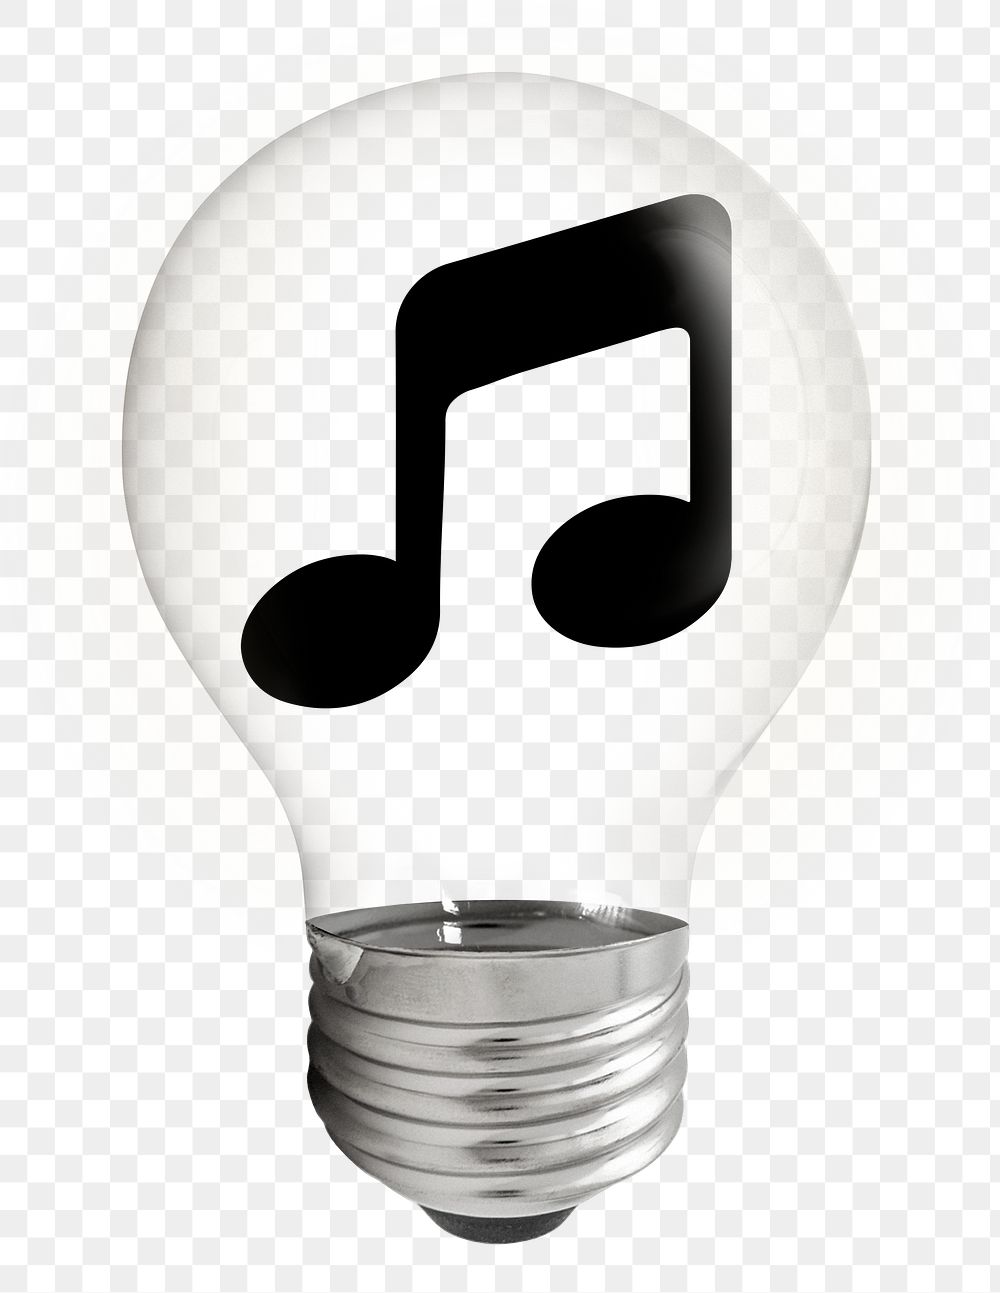 Music note icon png light bulb sticker, media symbol graphic on transparent background